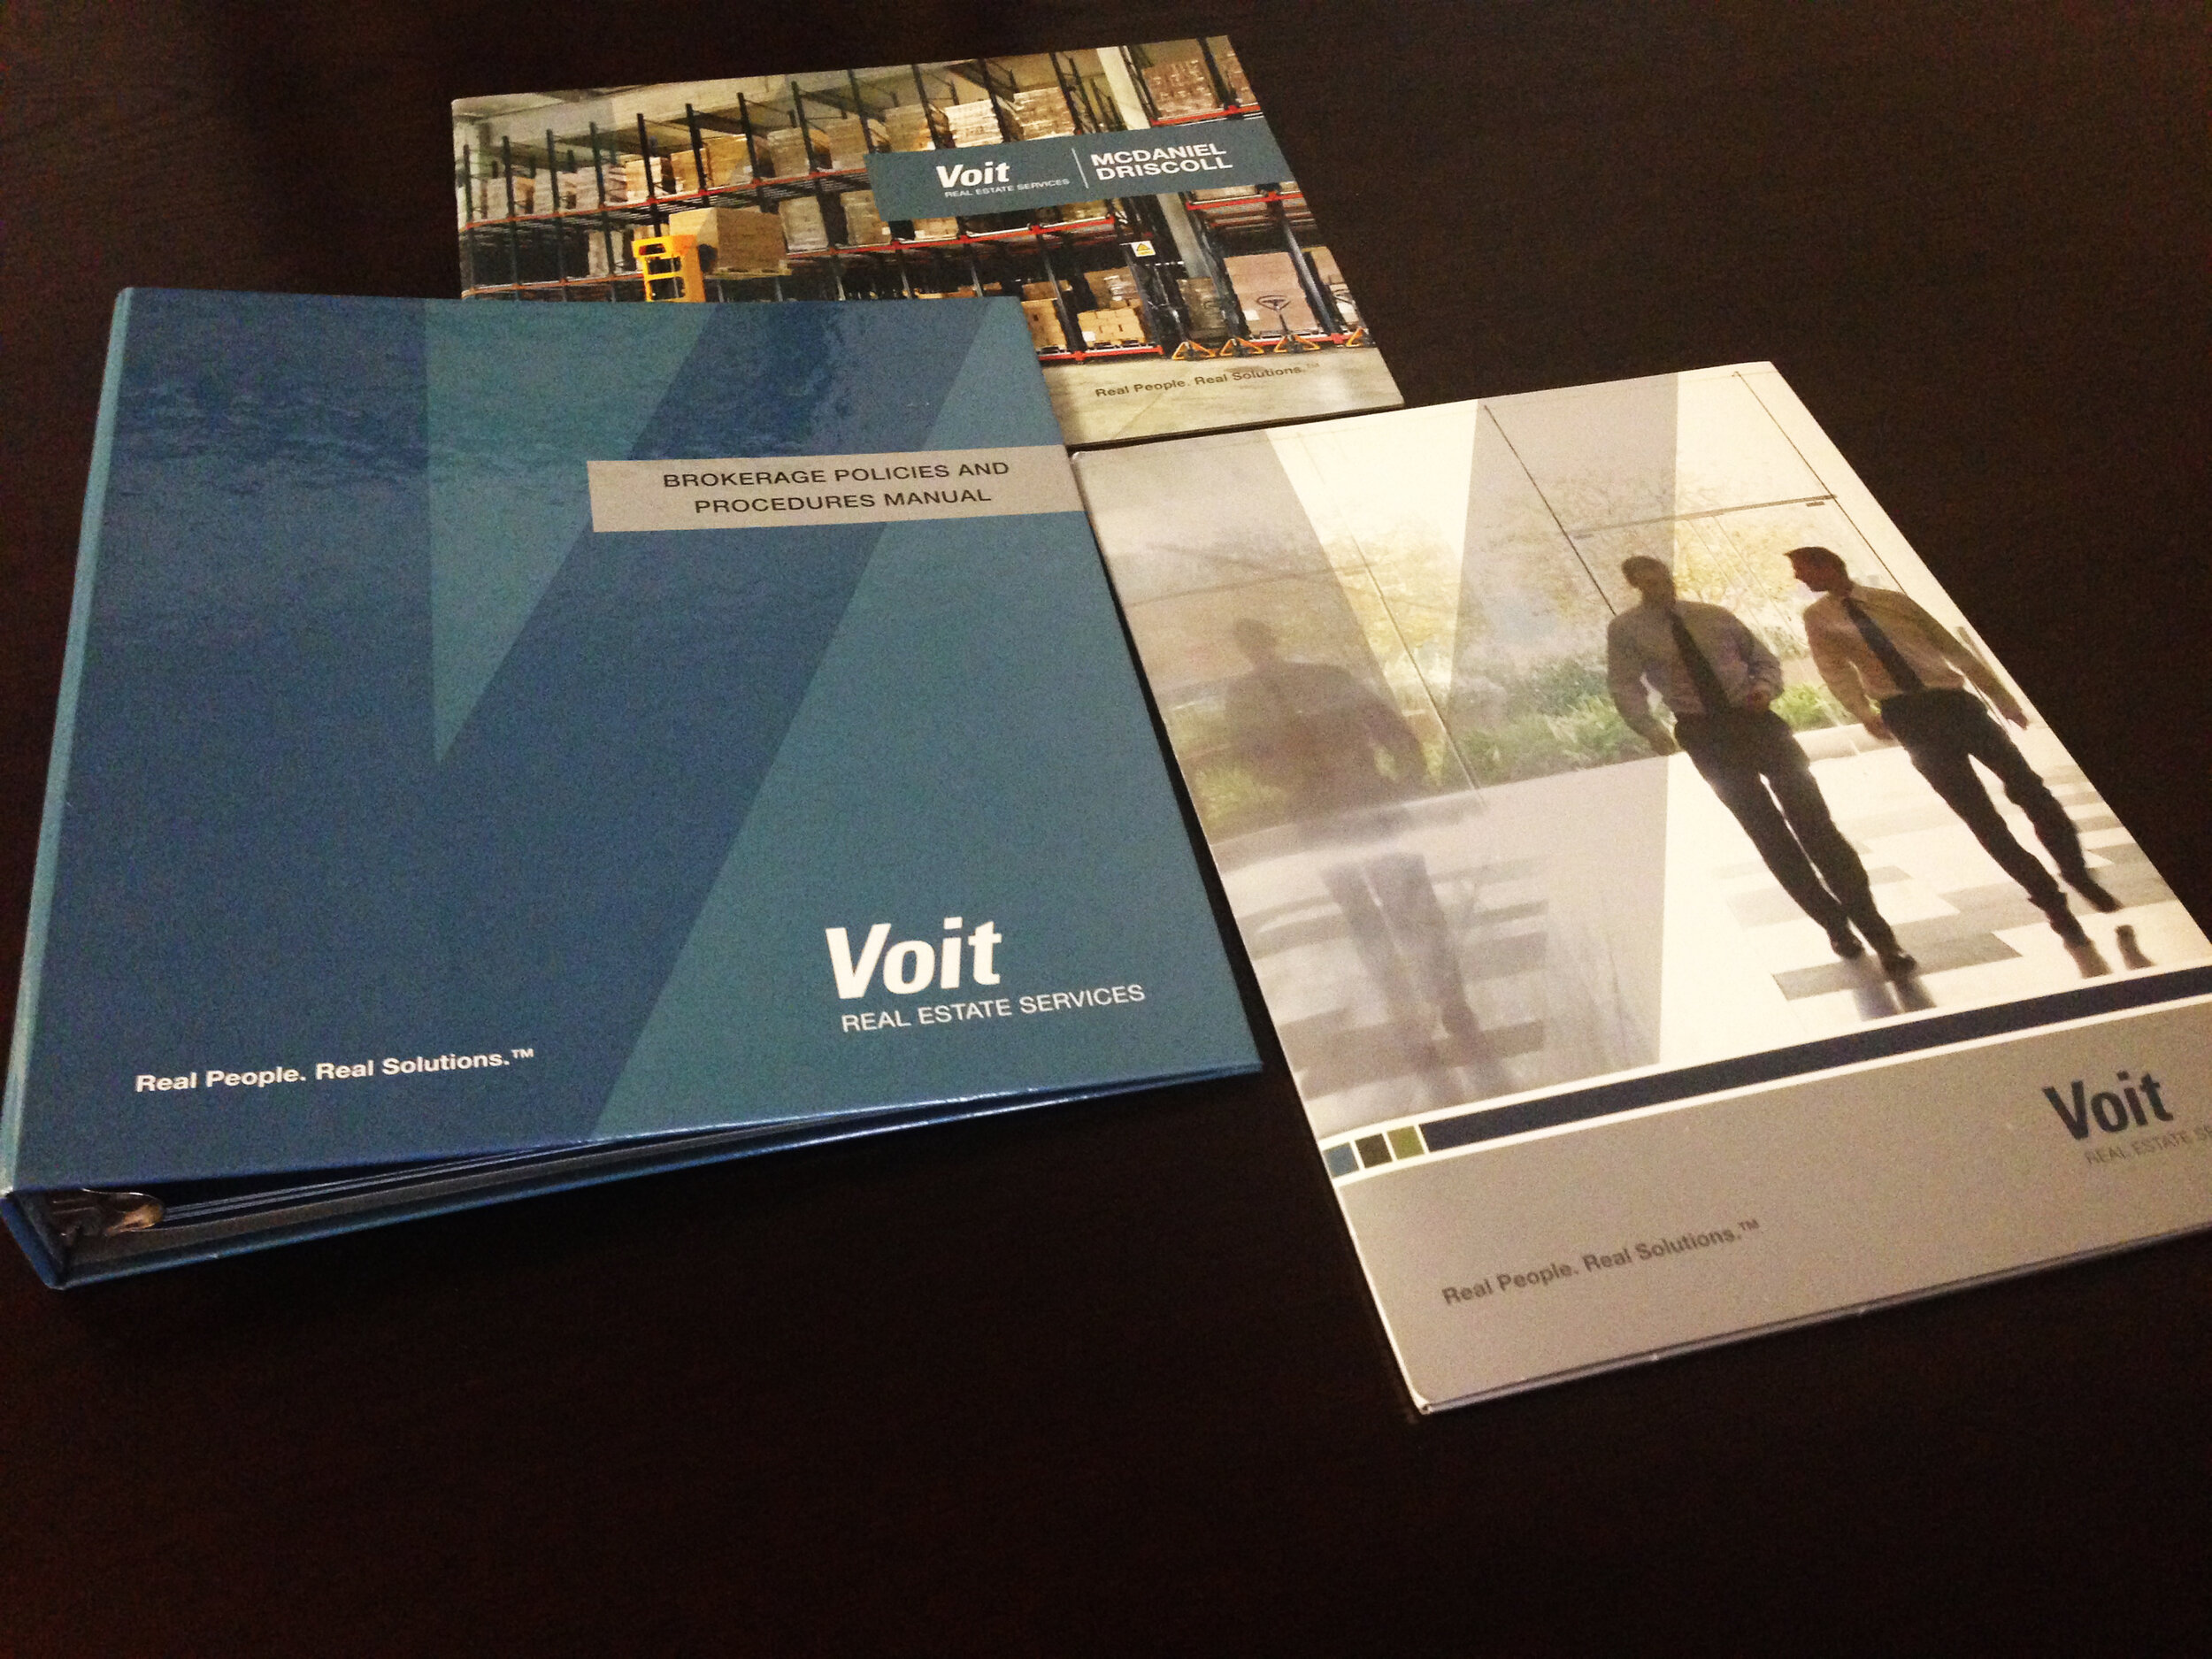 Voit-Print Collateral-1.JPG